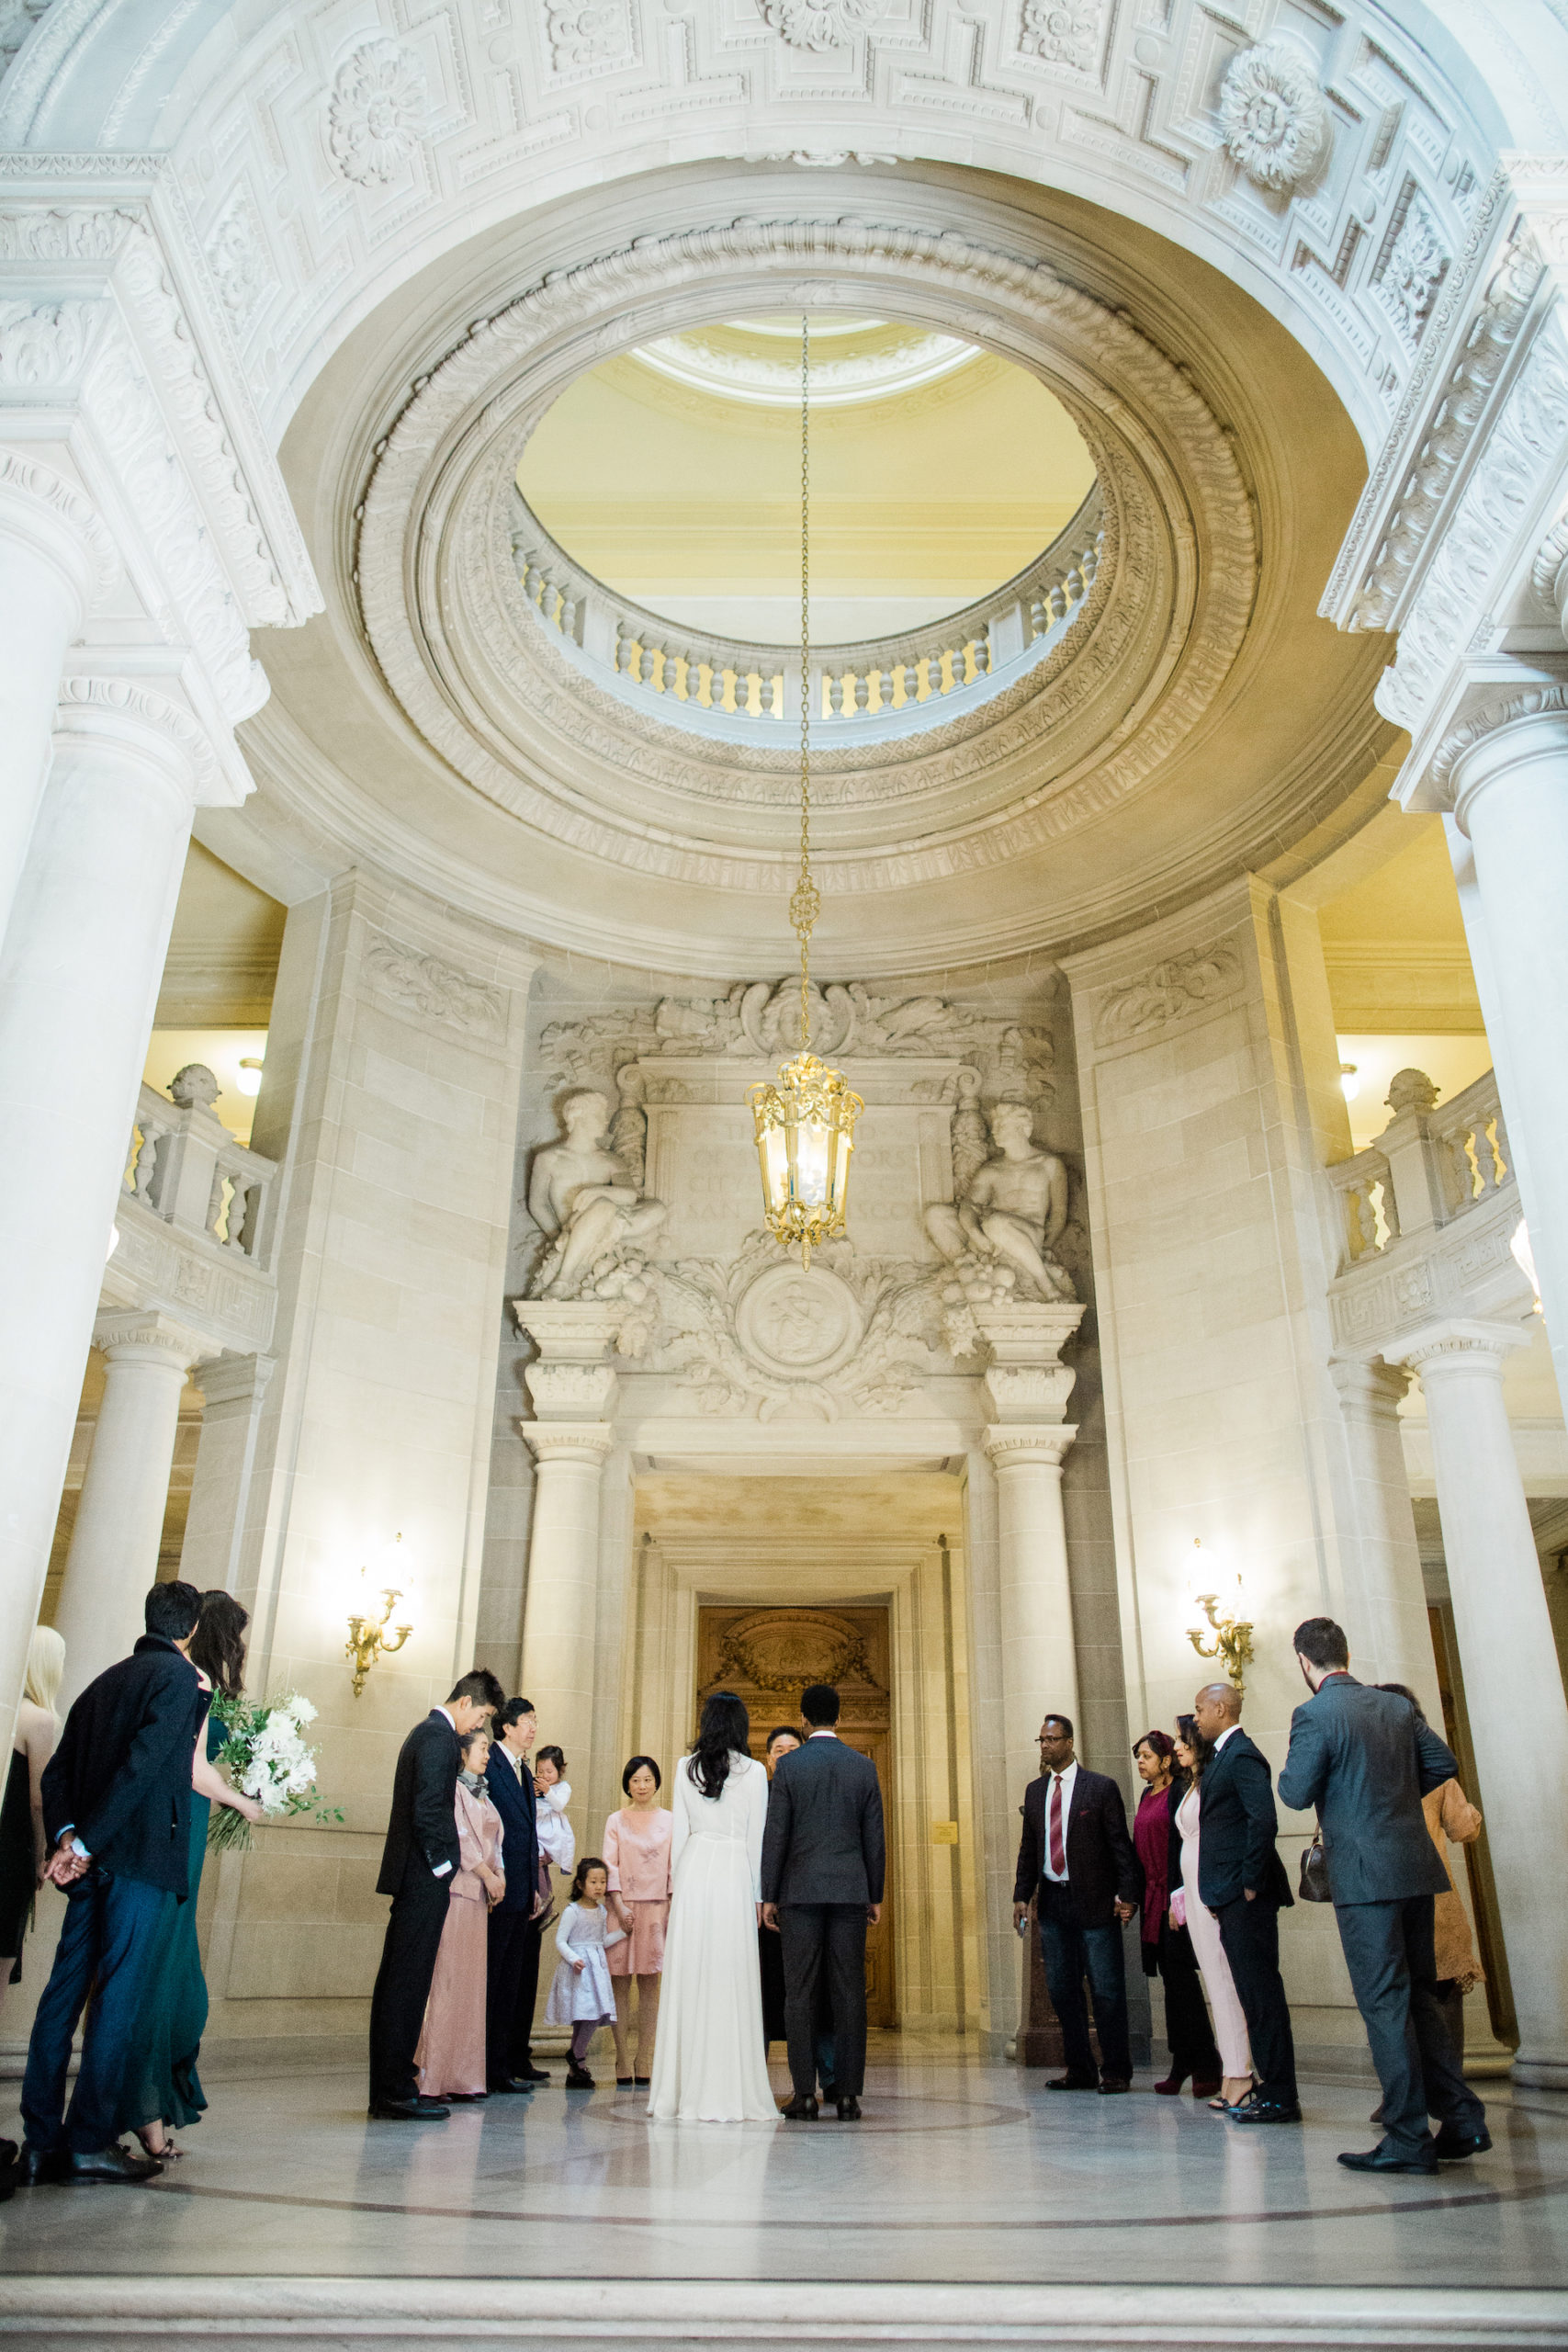 A wedding couple have their ceremony in the center of City Hall.